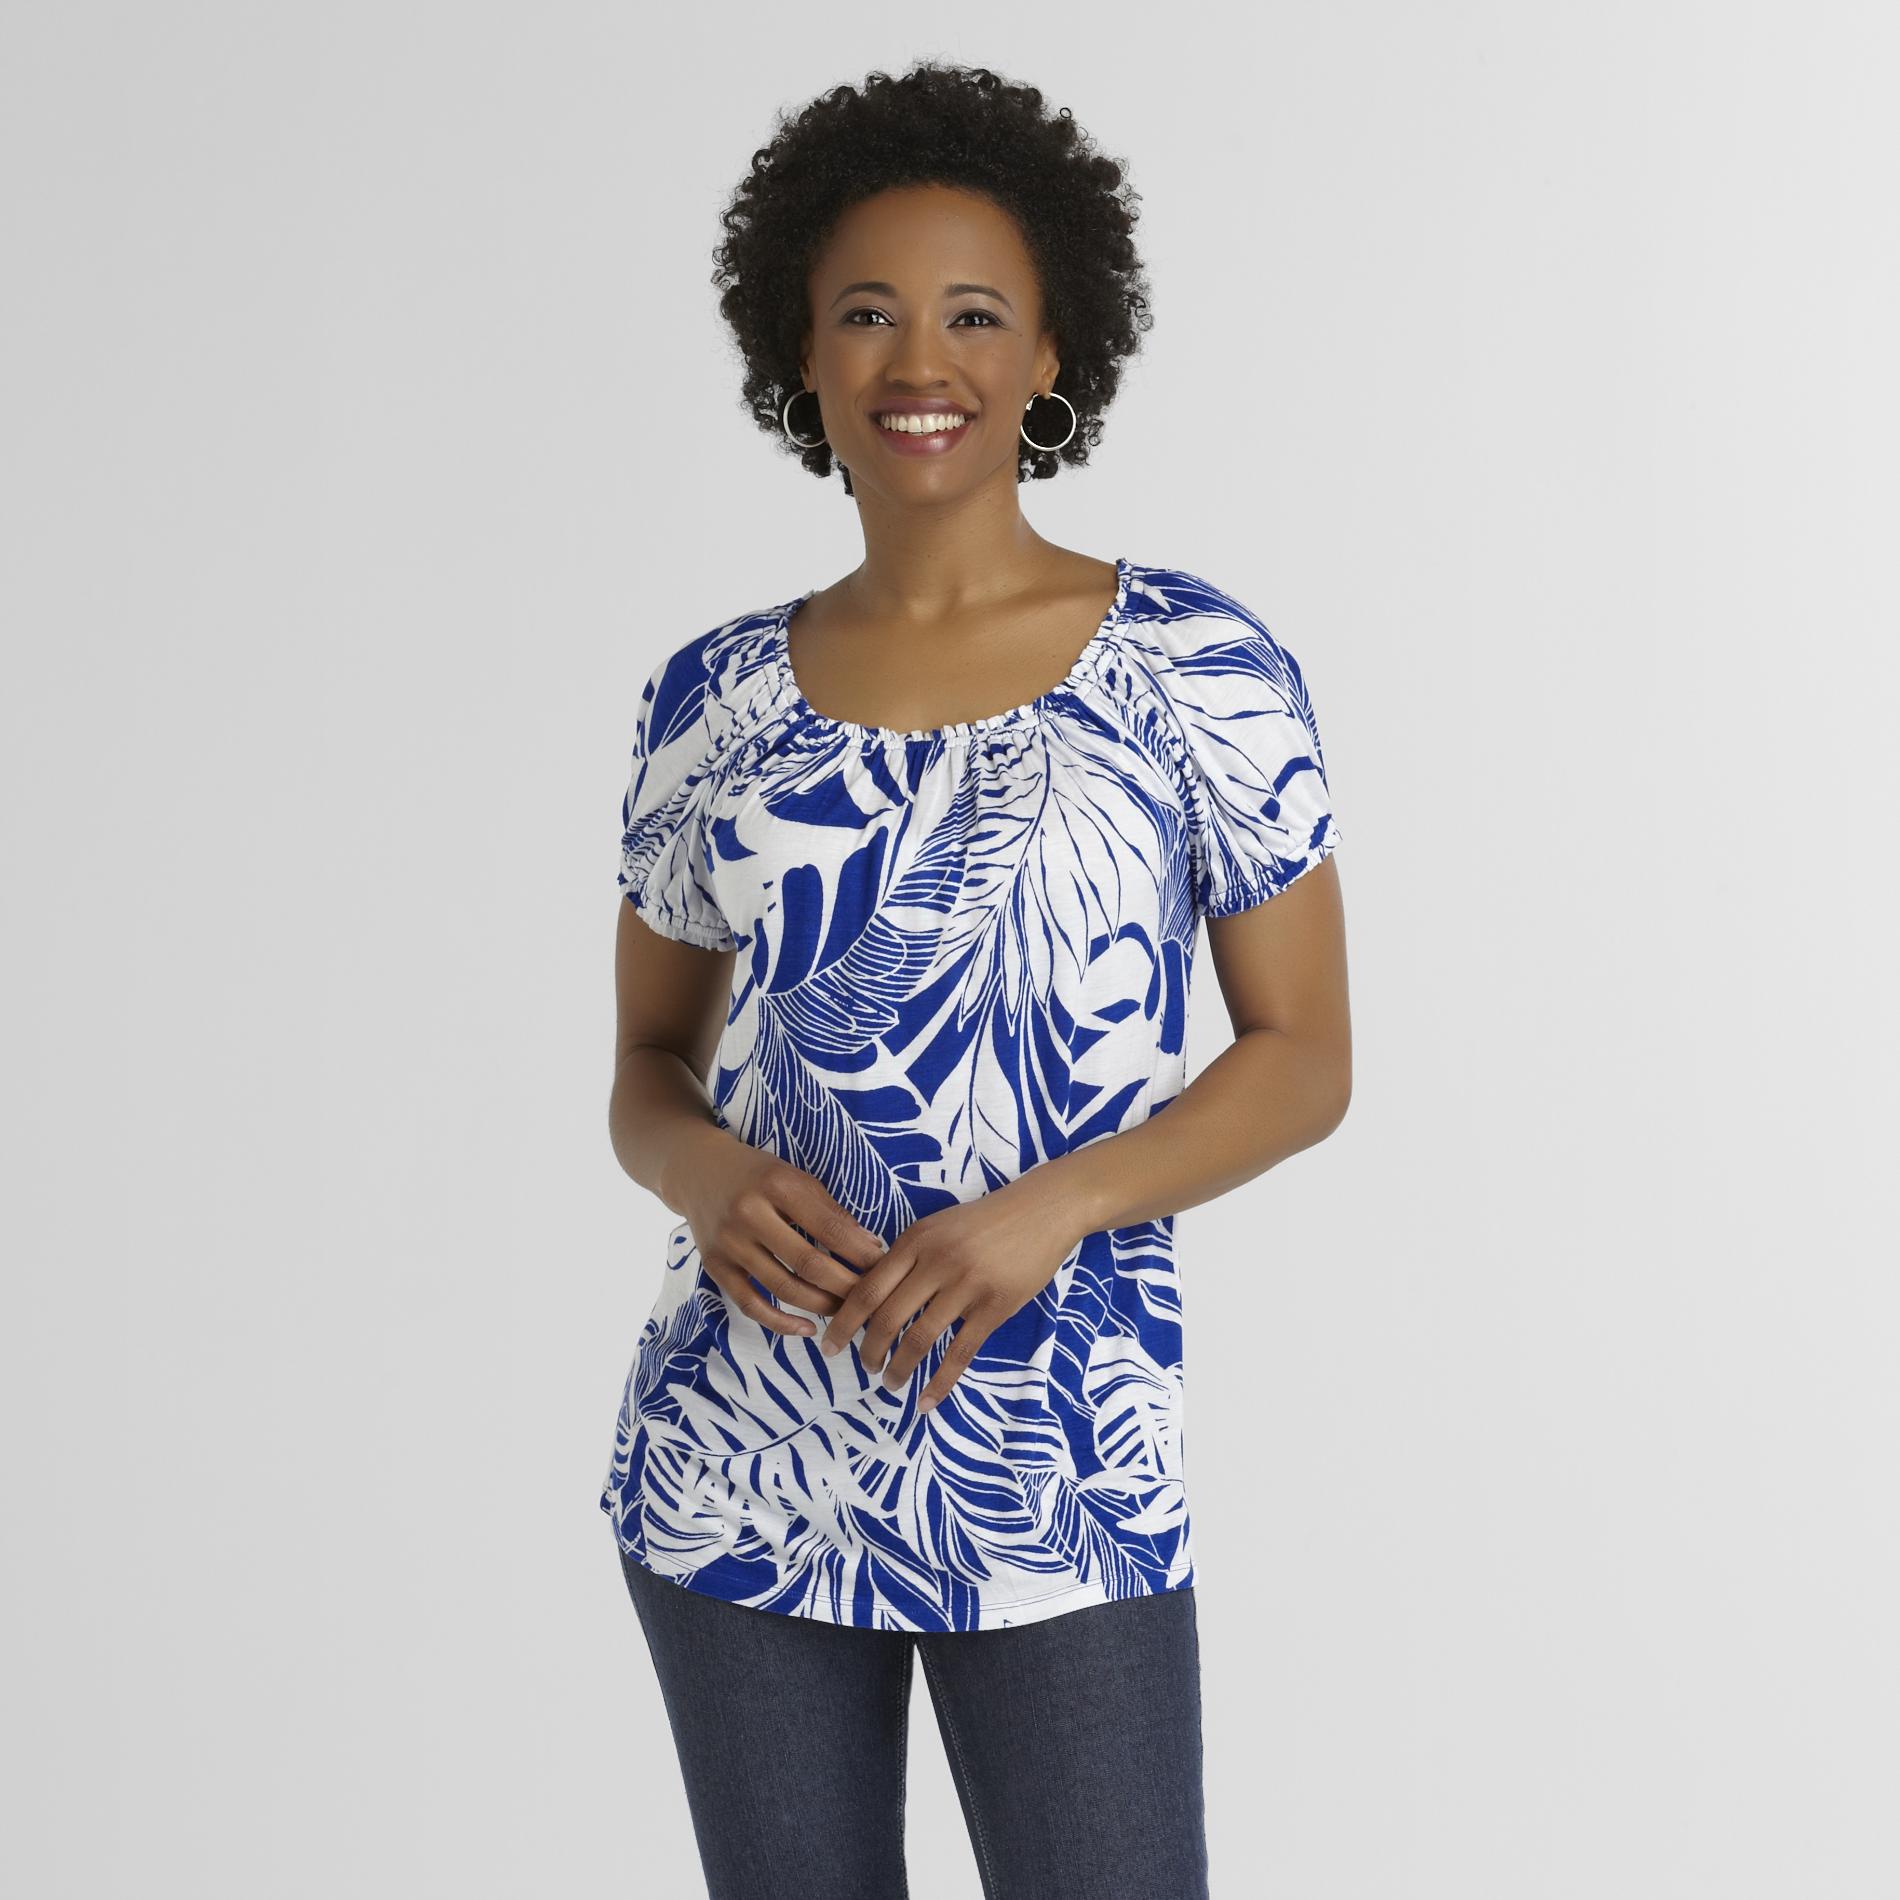 Jaclyn Smith Women's Peasant Blouse - Tropical